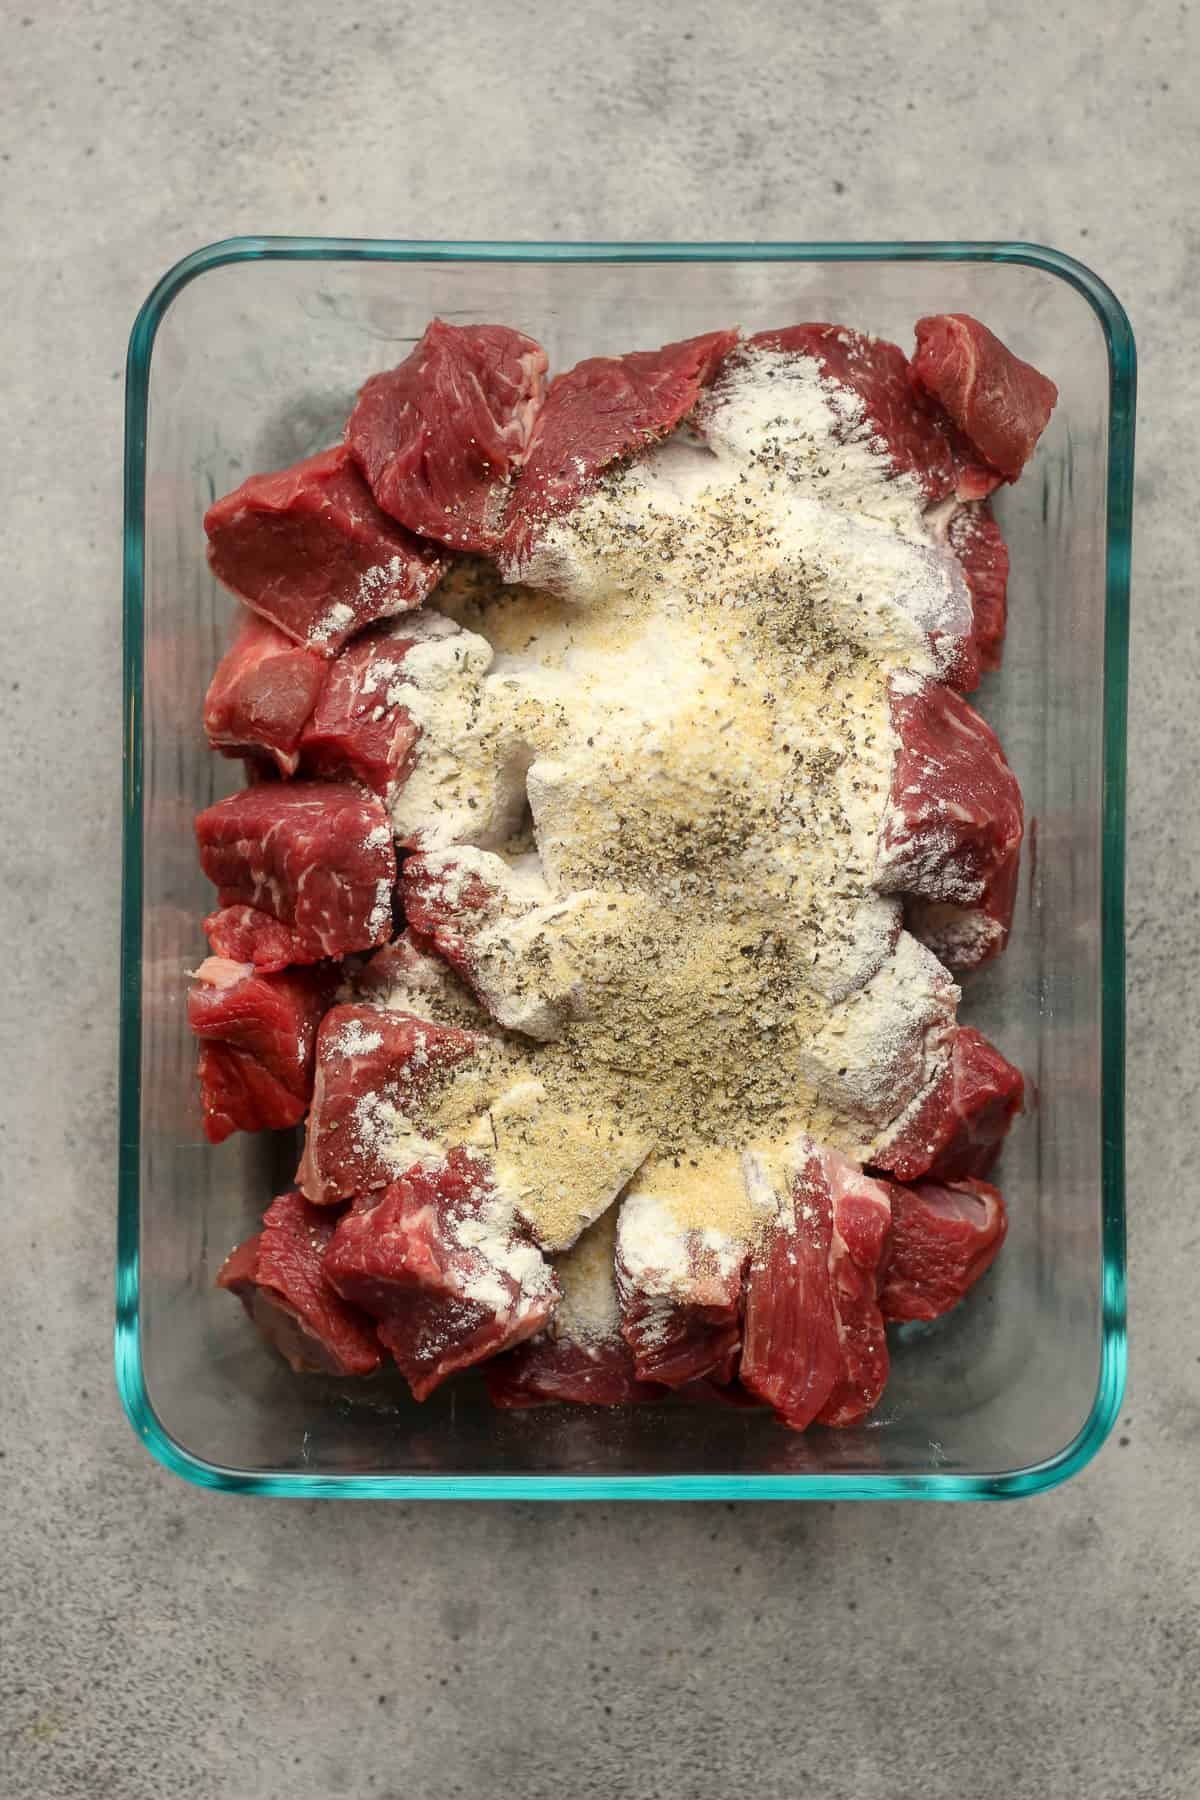 A bowl of the beef pieces with flour and seasonings.